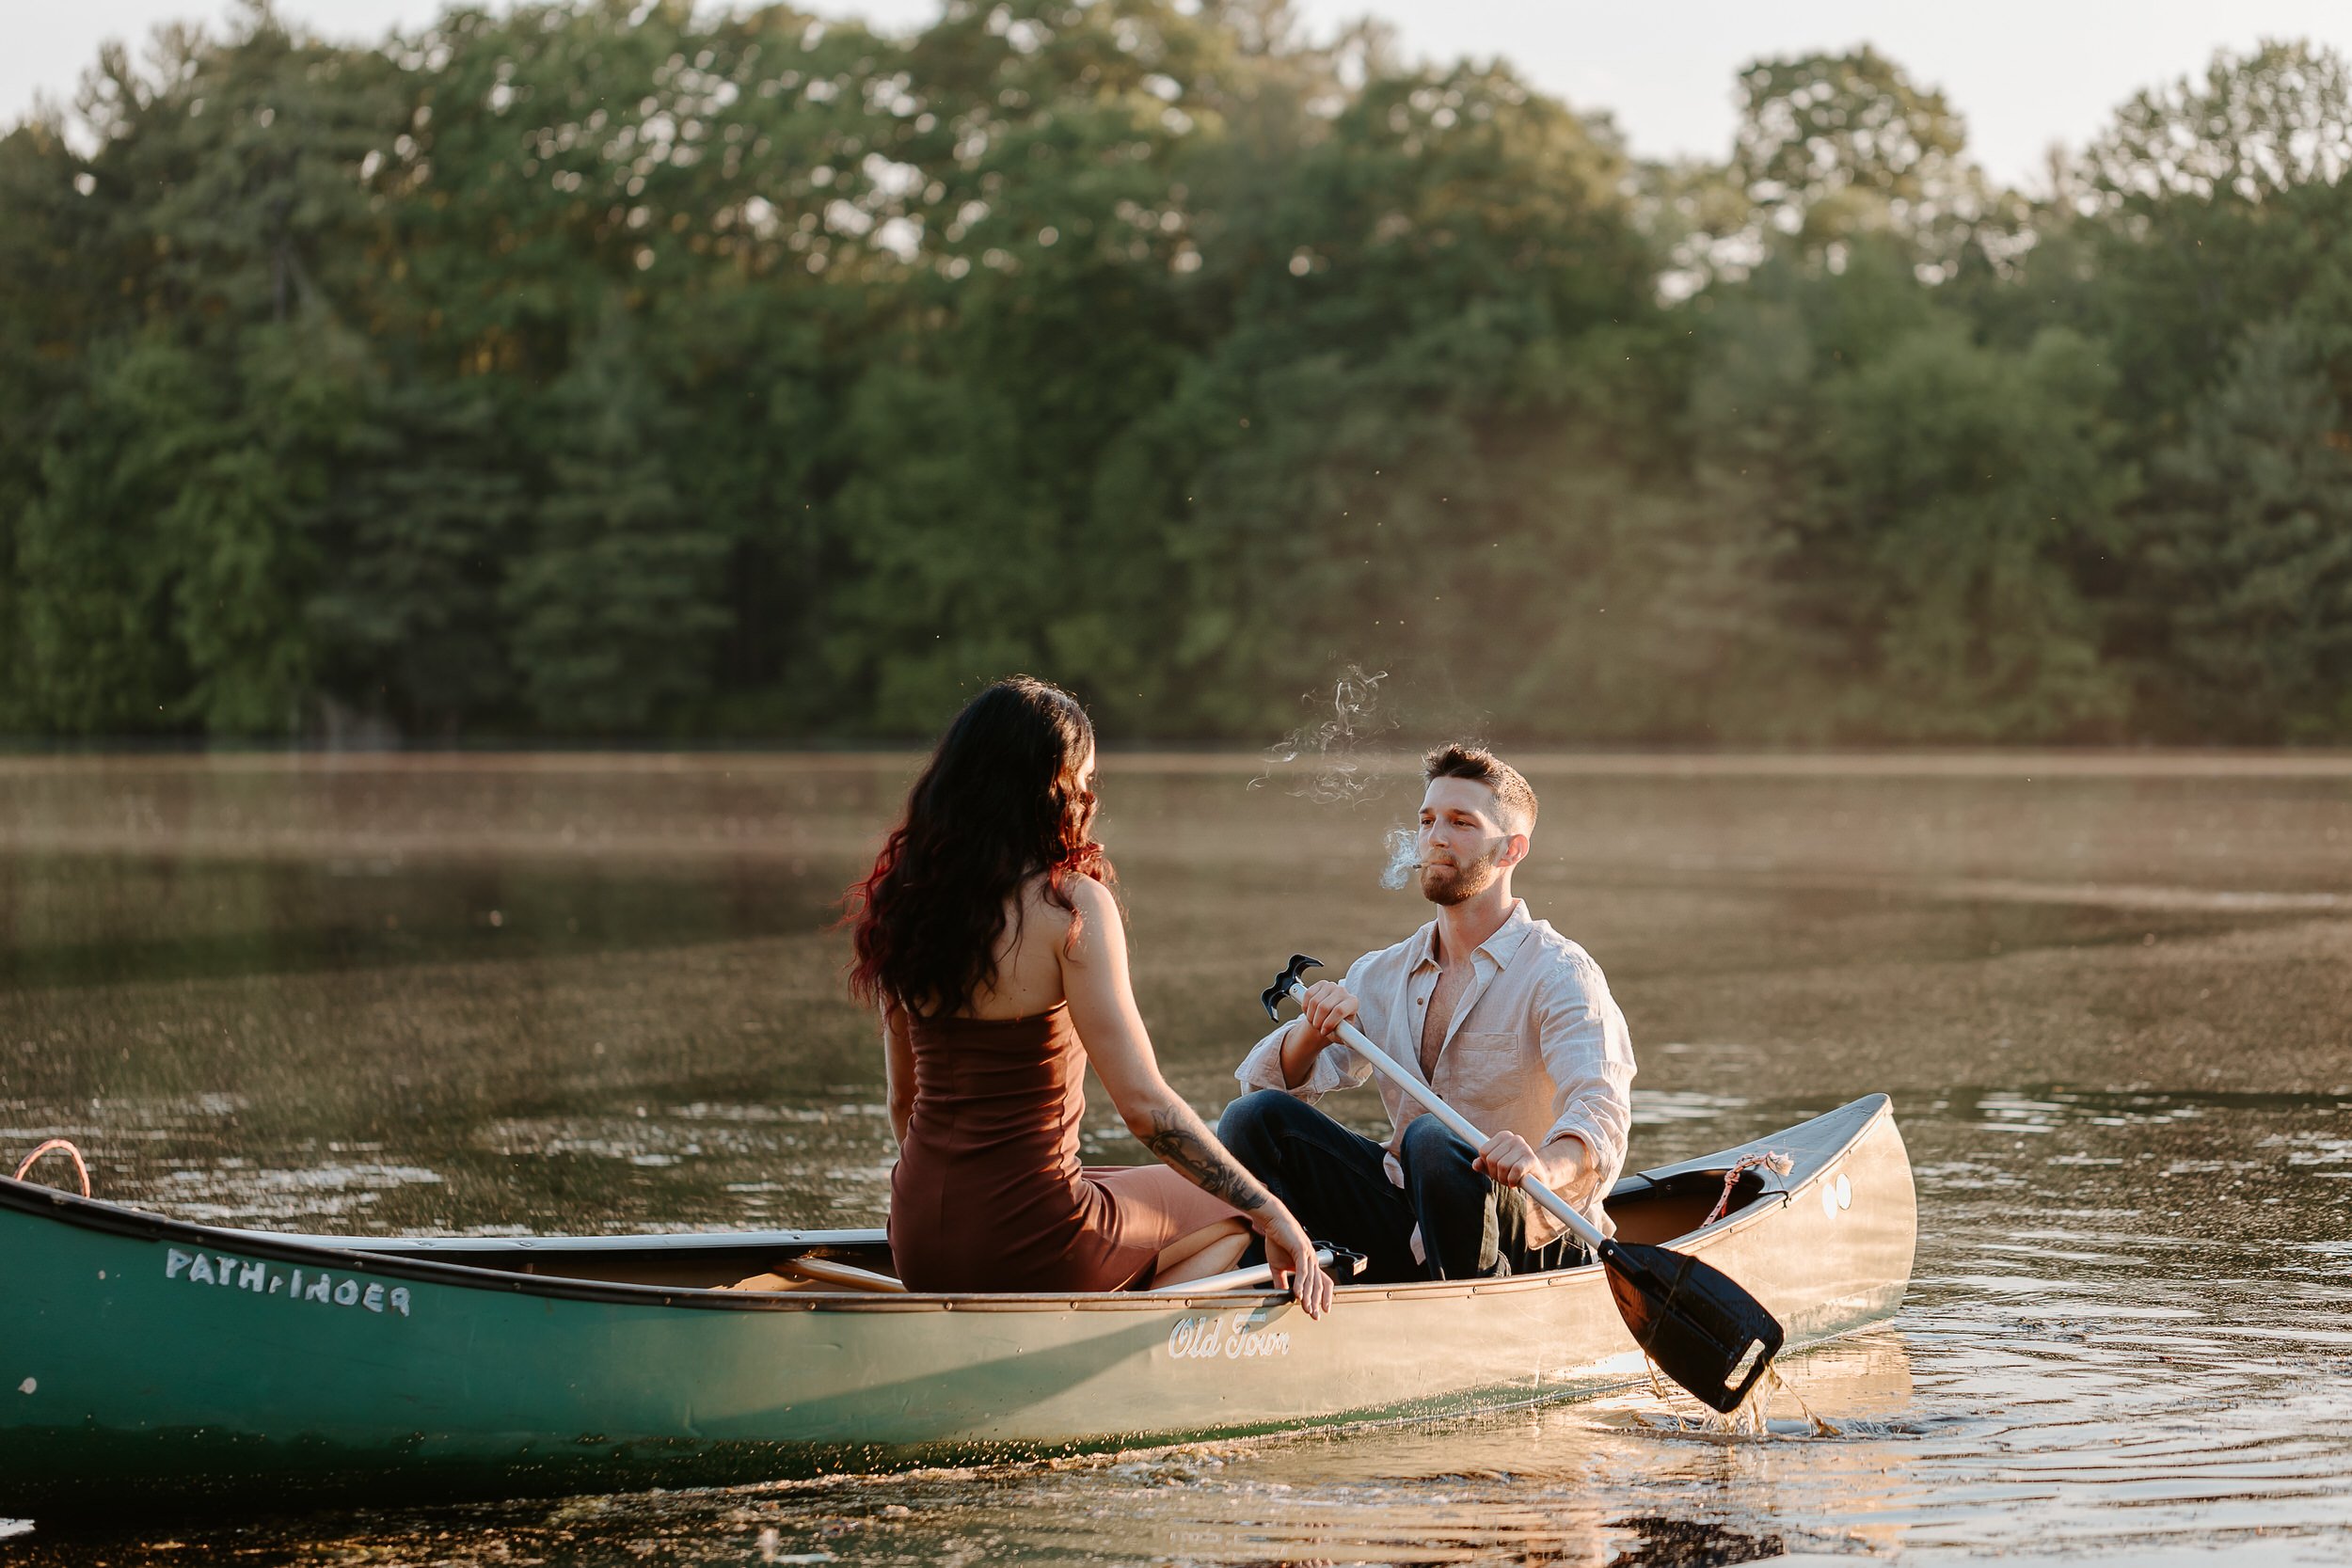 Man and woman sit in canoe on the lake.